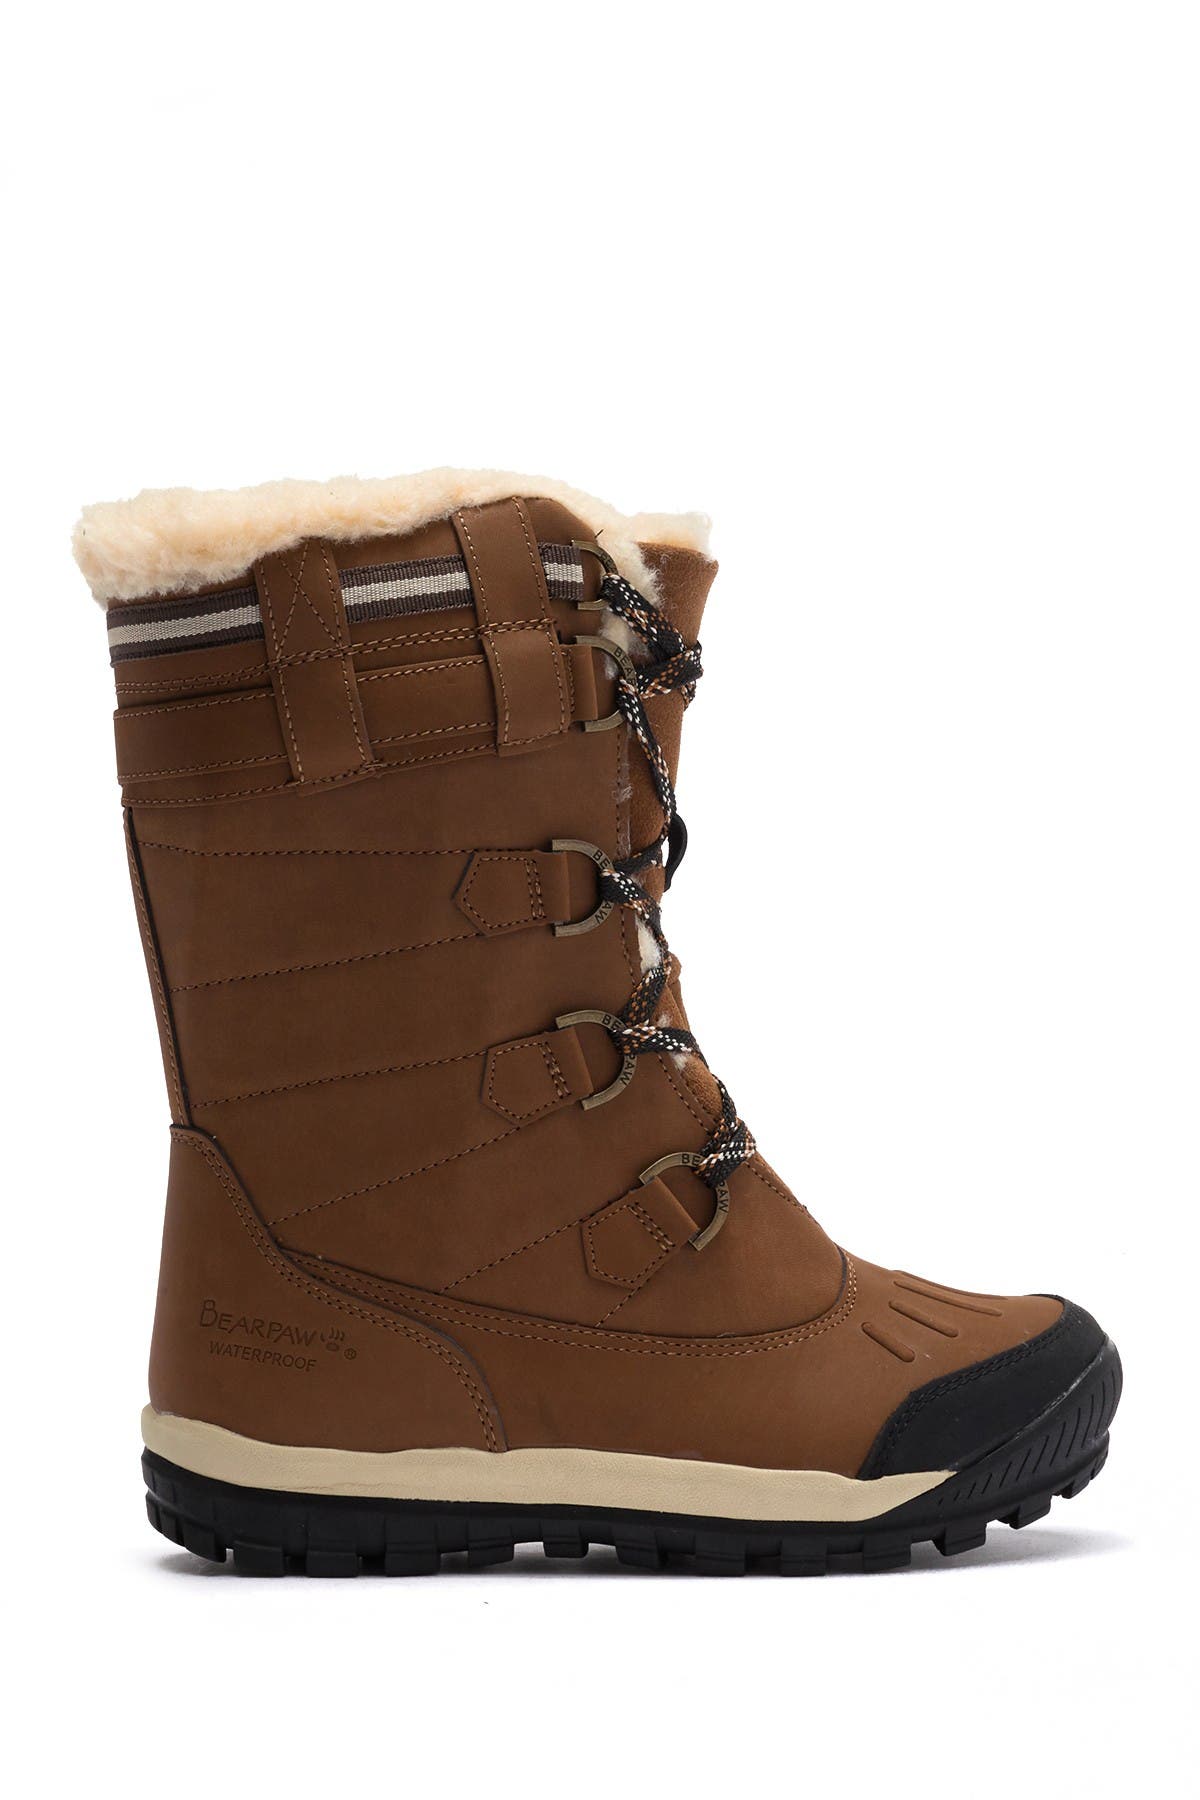 bearpaw lace up back boots